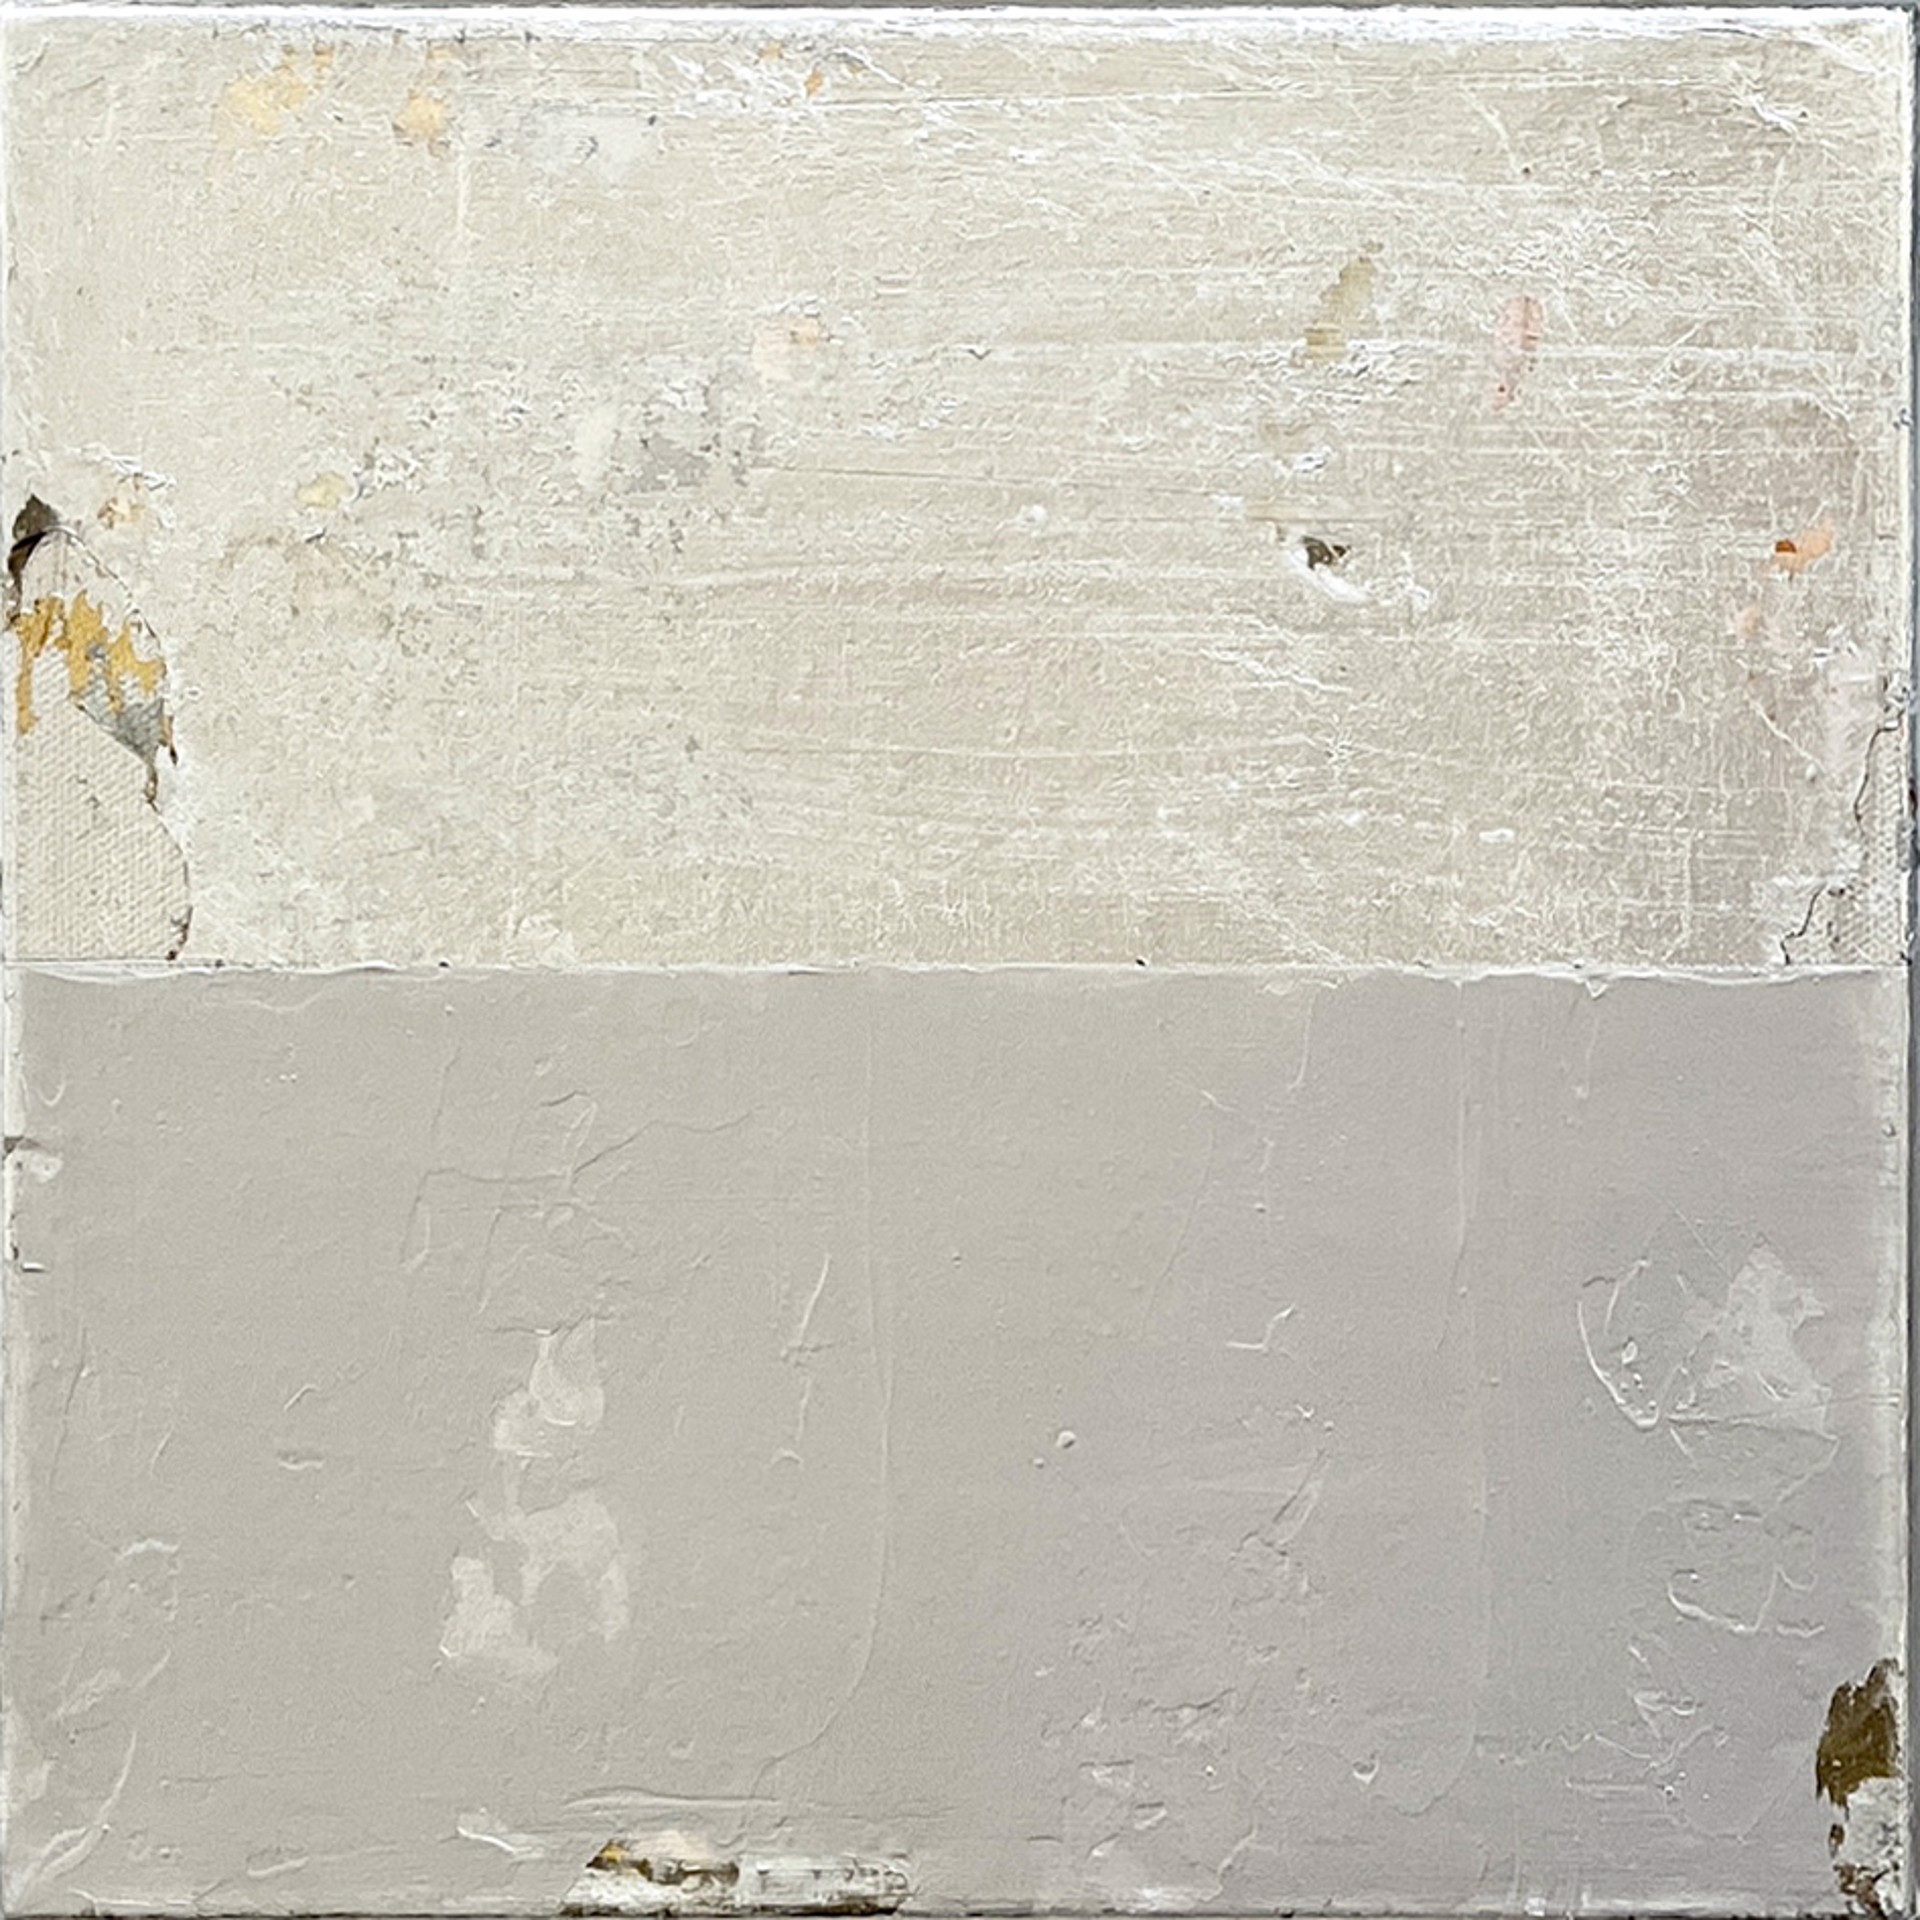 Silver and Silver (SS052) is 1 of 4 silver leaf mixed media panels from Japanese painter and artist Takefumi Hori.